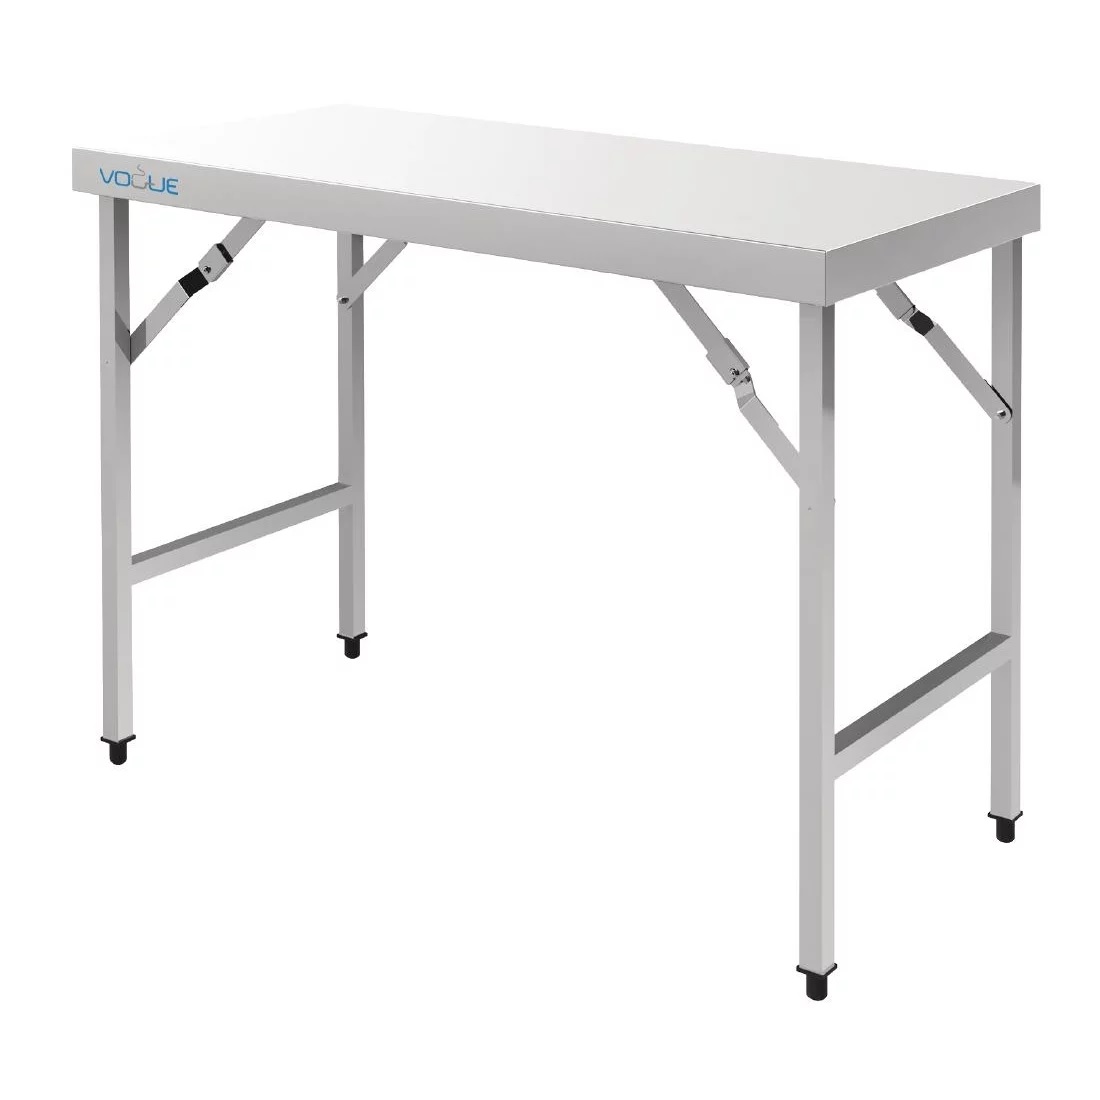 Vogue CB905 Stainless Steel Folding Table